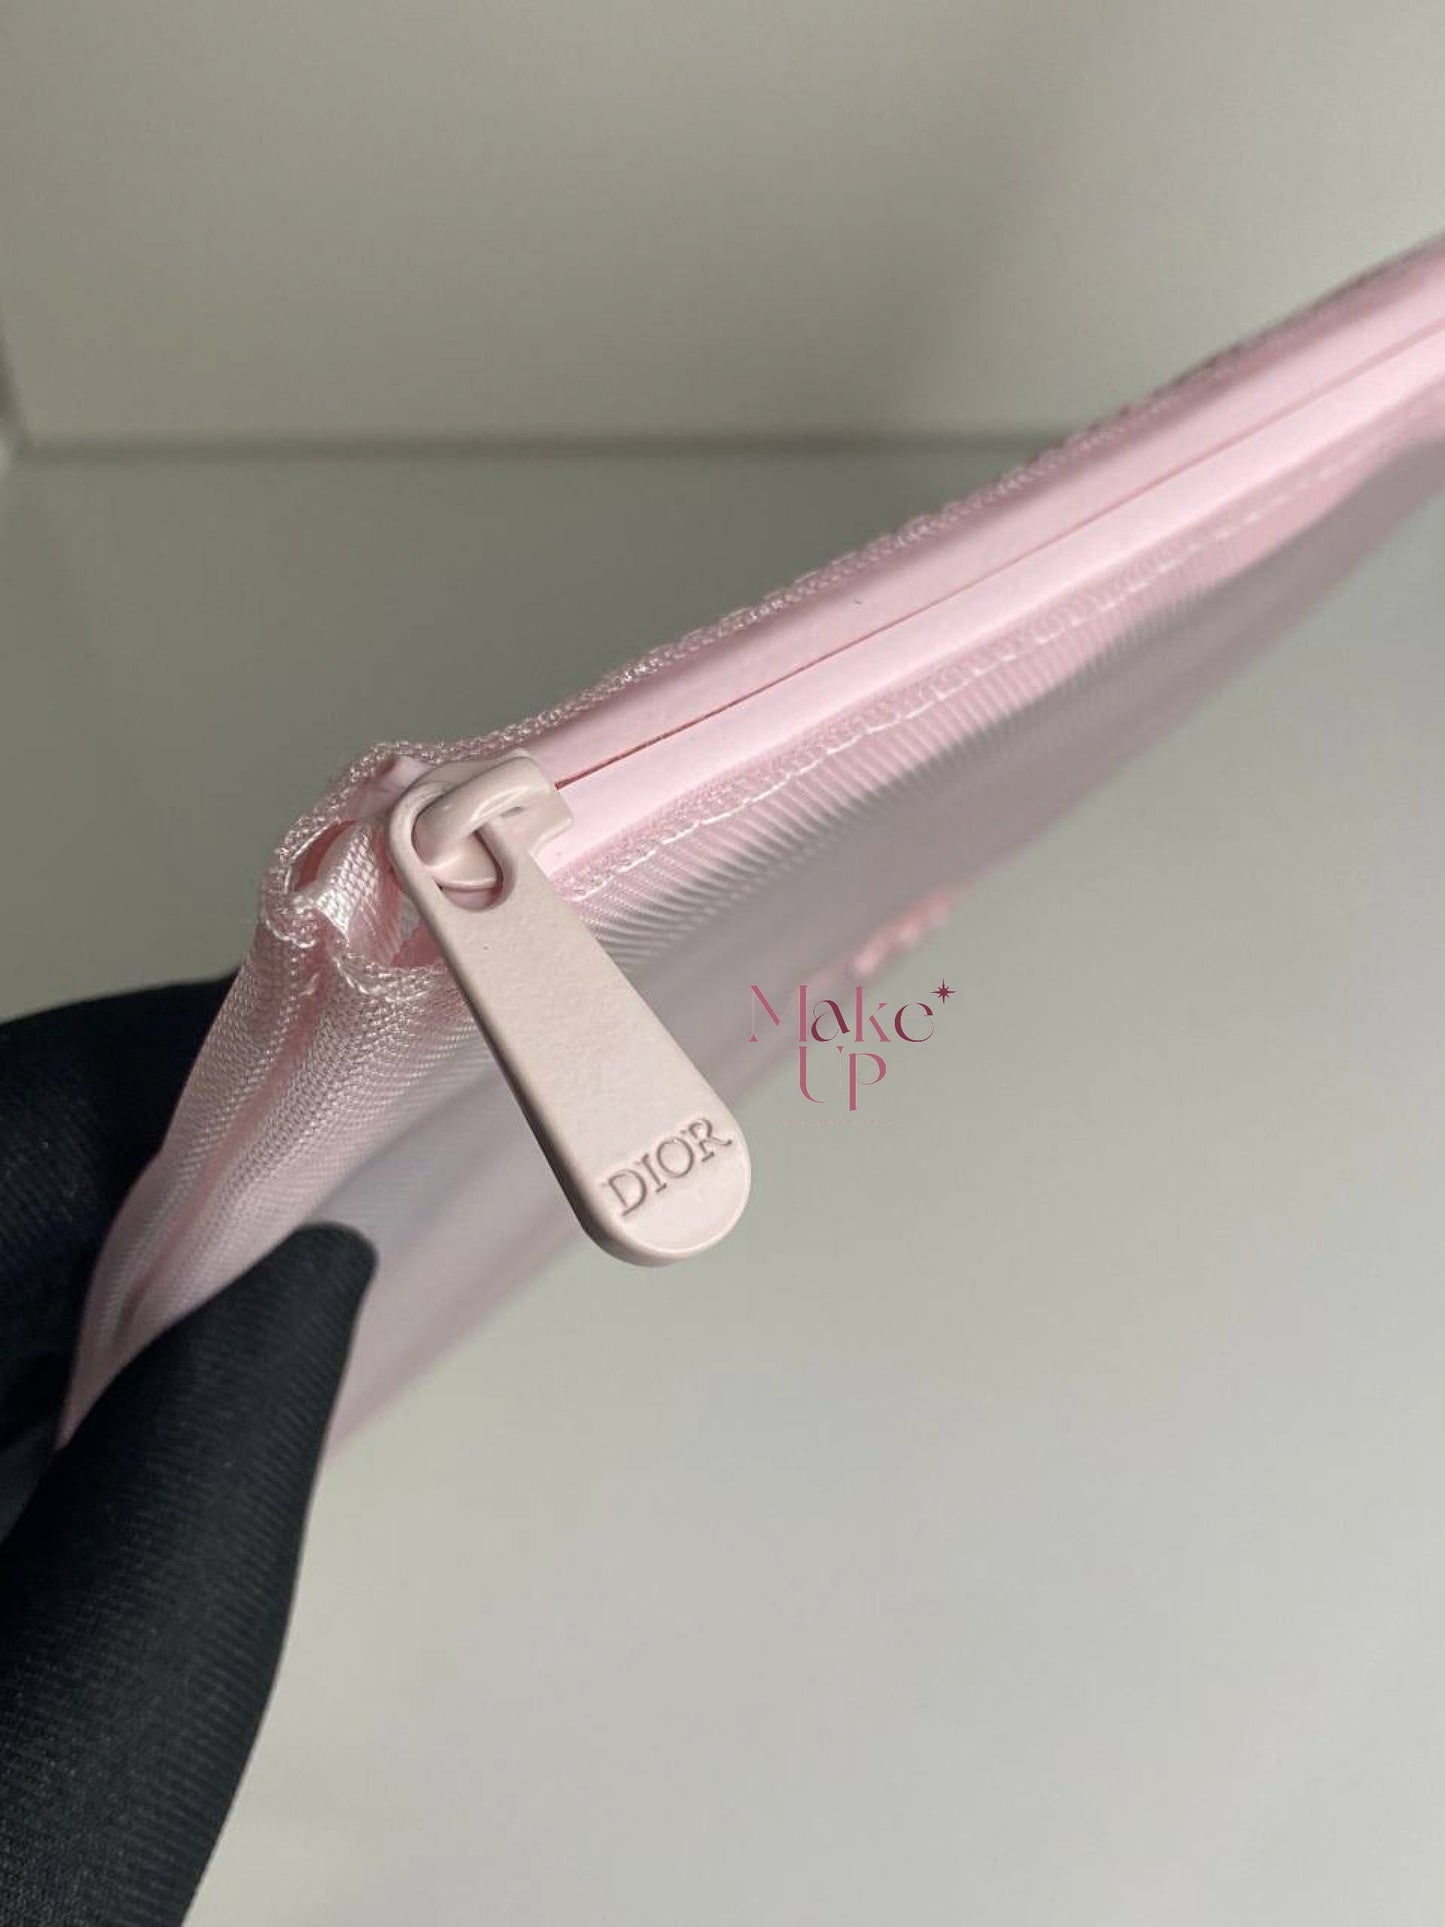 Miss Dior Blooming Pouch - Pink